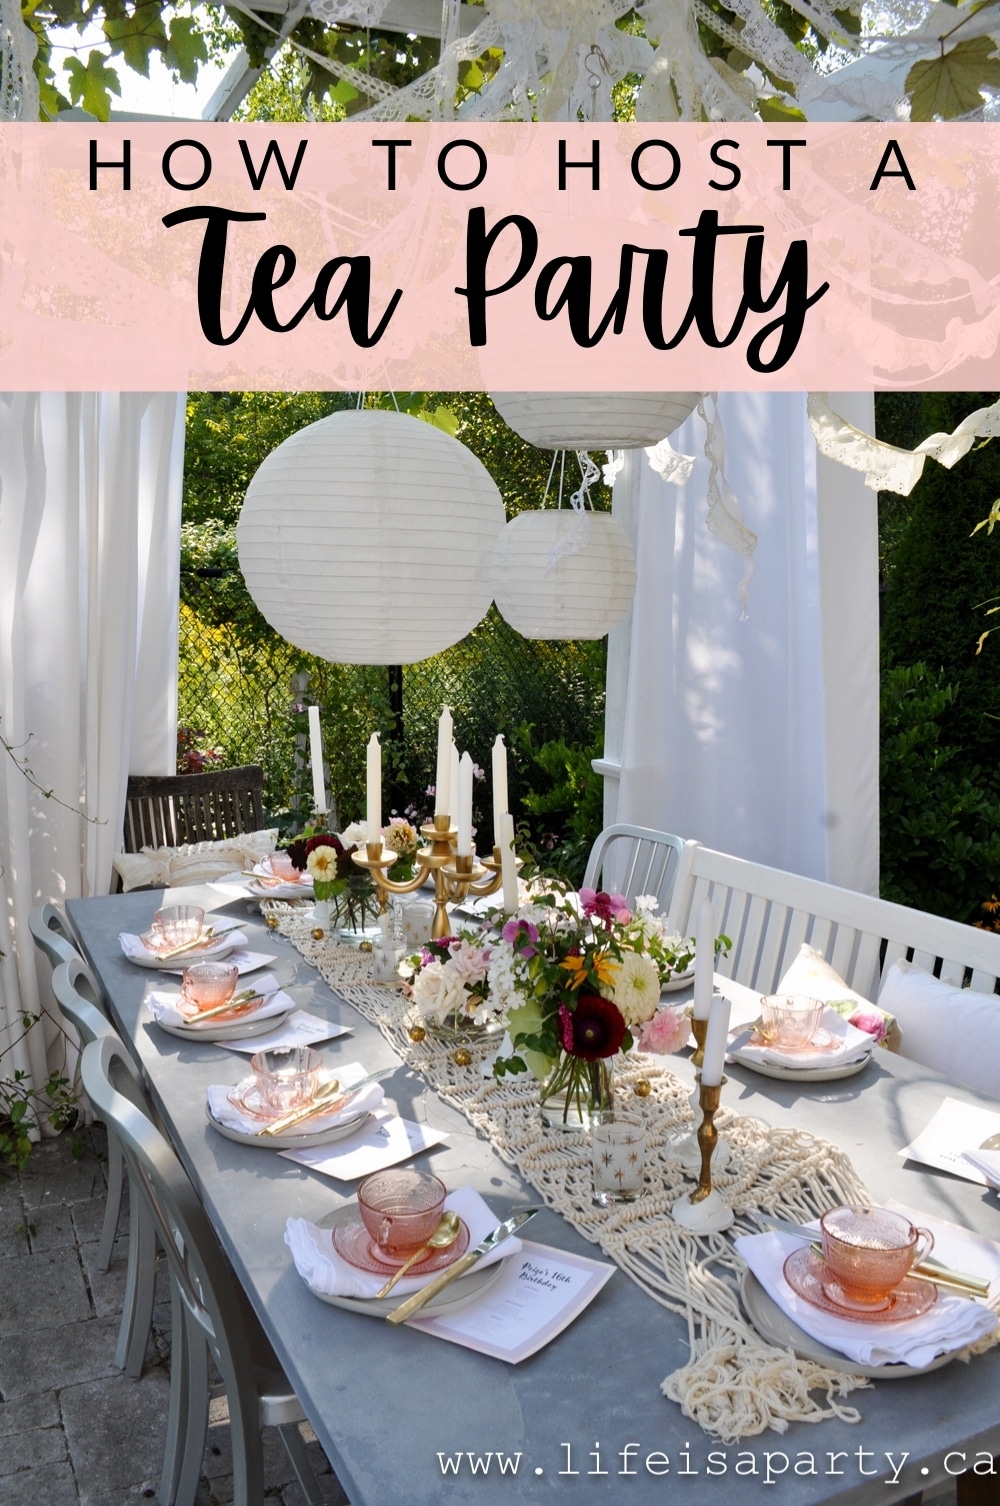 How To Host A Tea Party: ideas on what to serve at a tea party, including some recipes, and tips about hosting.